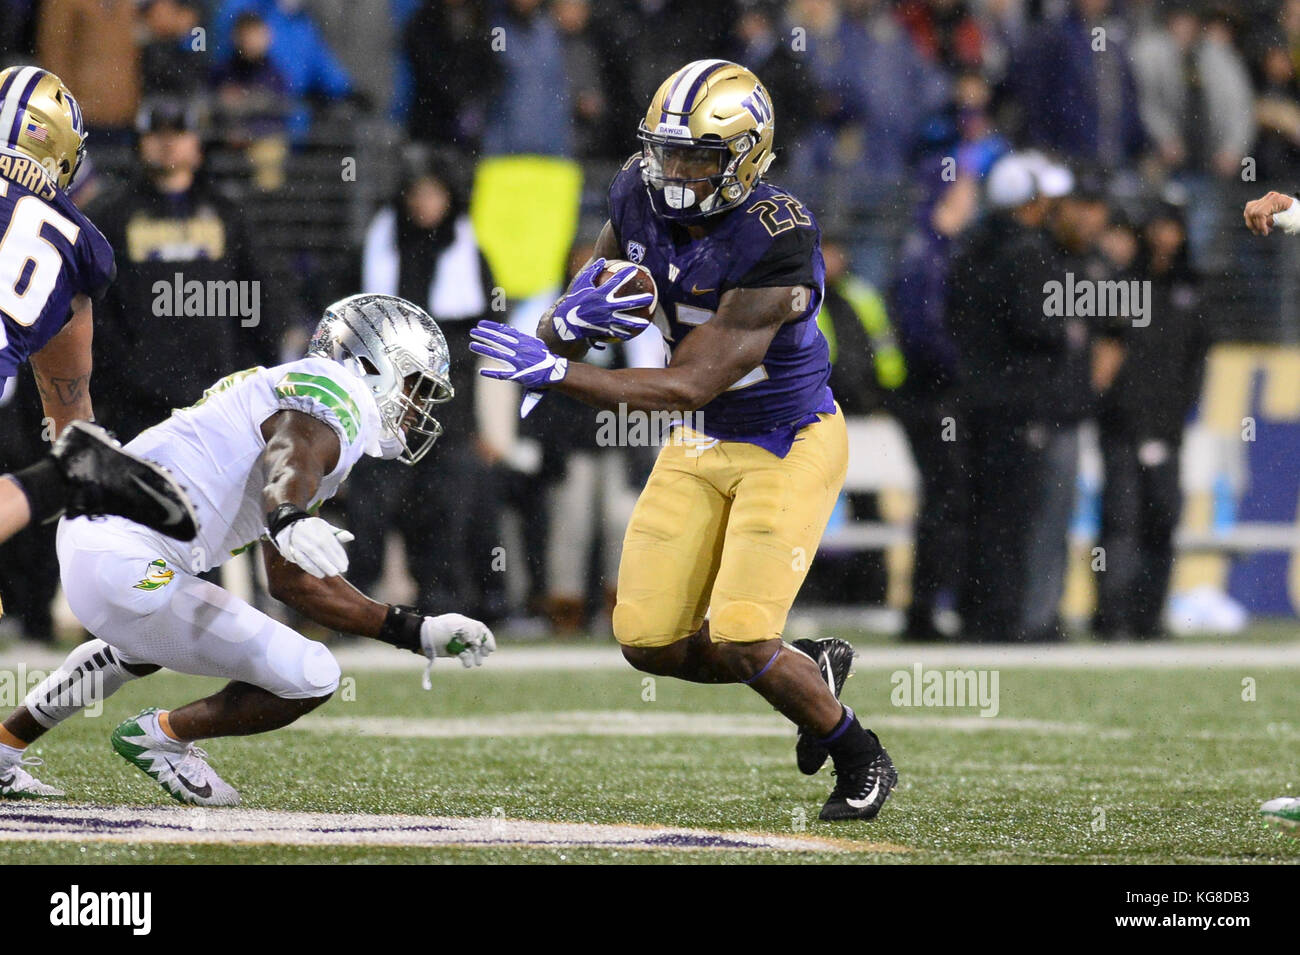 Seattle, WA, USA. 4th Nov, 2017. UW tailback Lavon Coleman (22) runs up the middle in a PAC12 football game between the Oregon Ducks and the Washington Huskies. The game was played at Husky Stadium on the University of Washington campus in Seattle, WA. Jeff Halstead/CSM/Alamy Live News Stock Photo